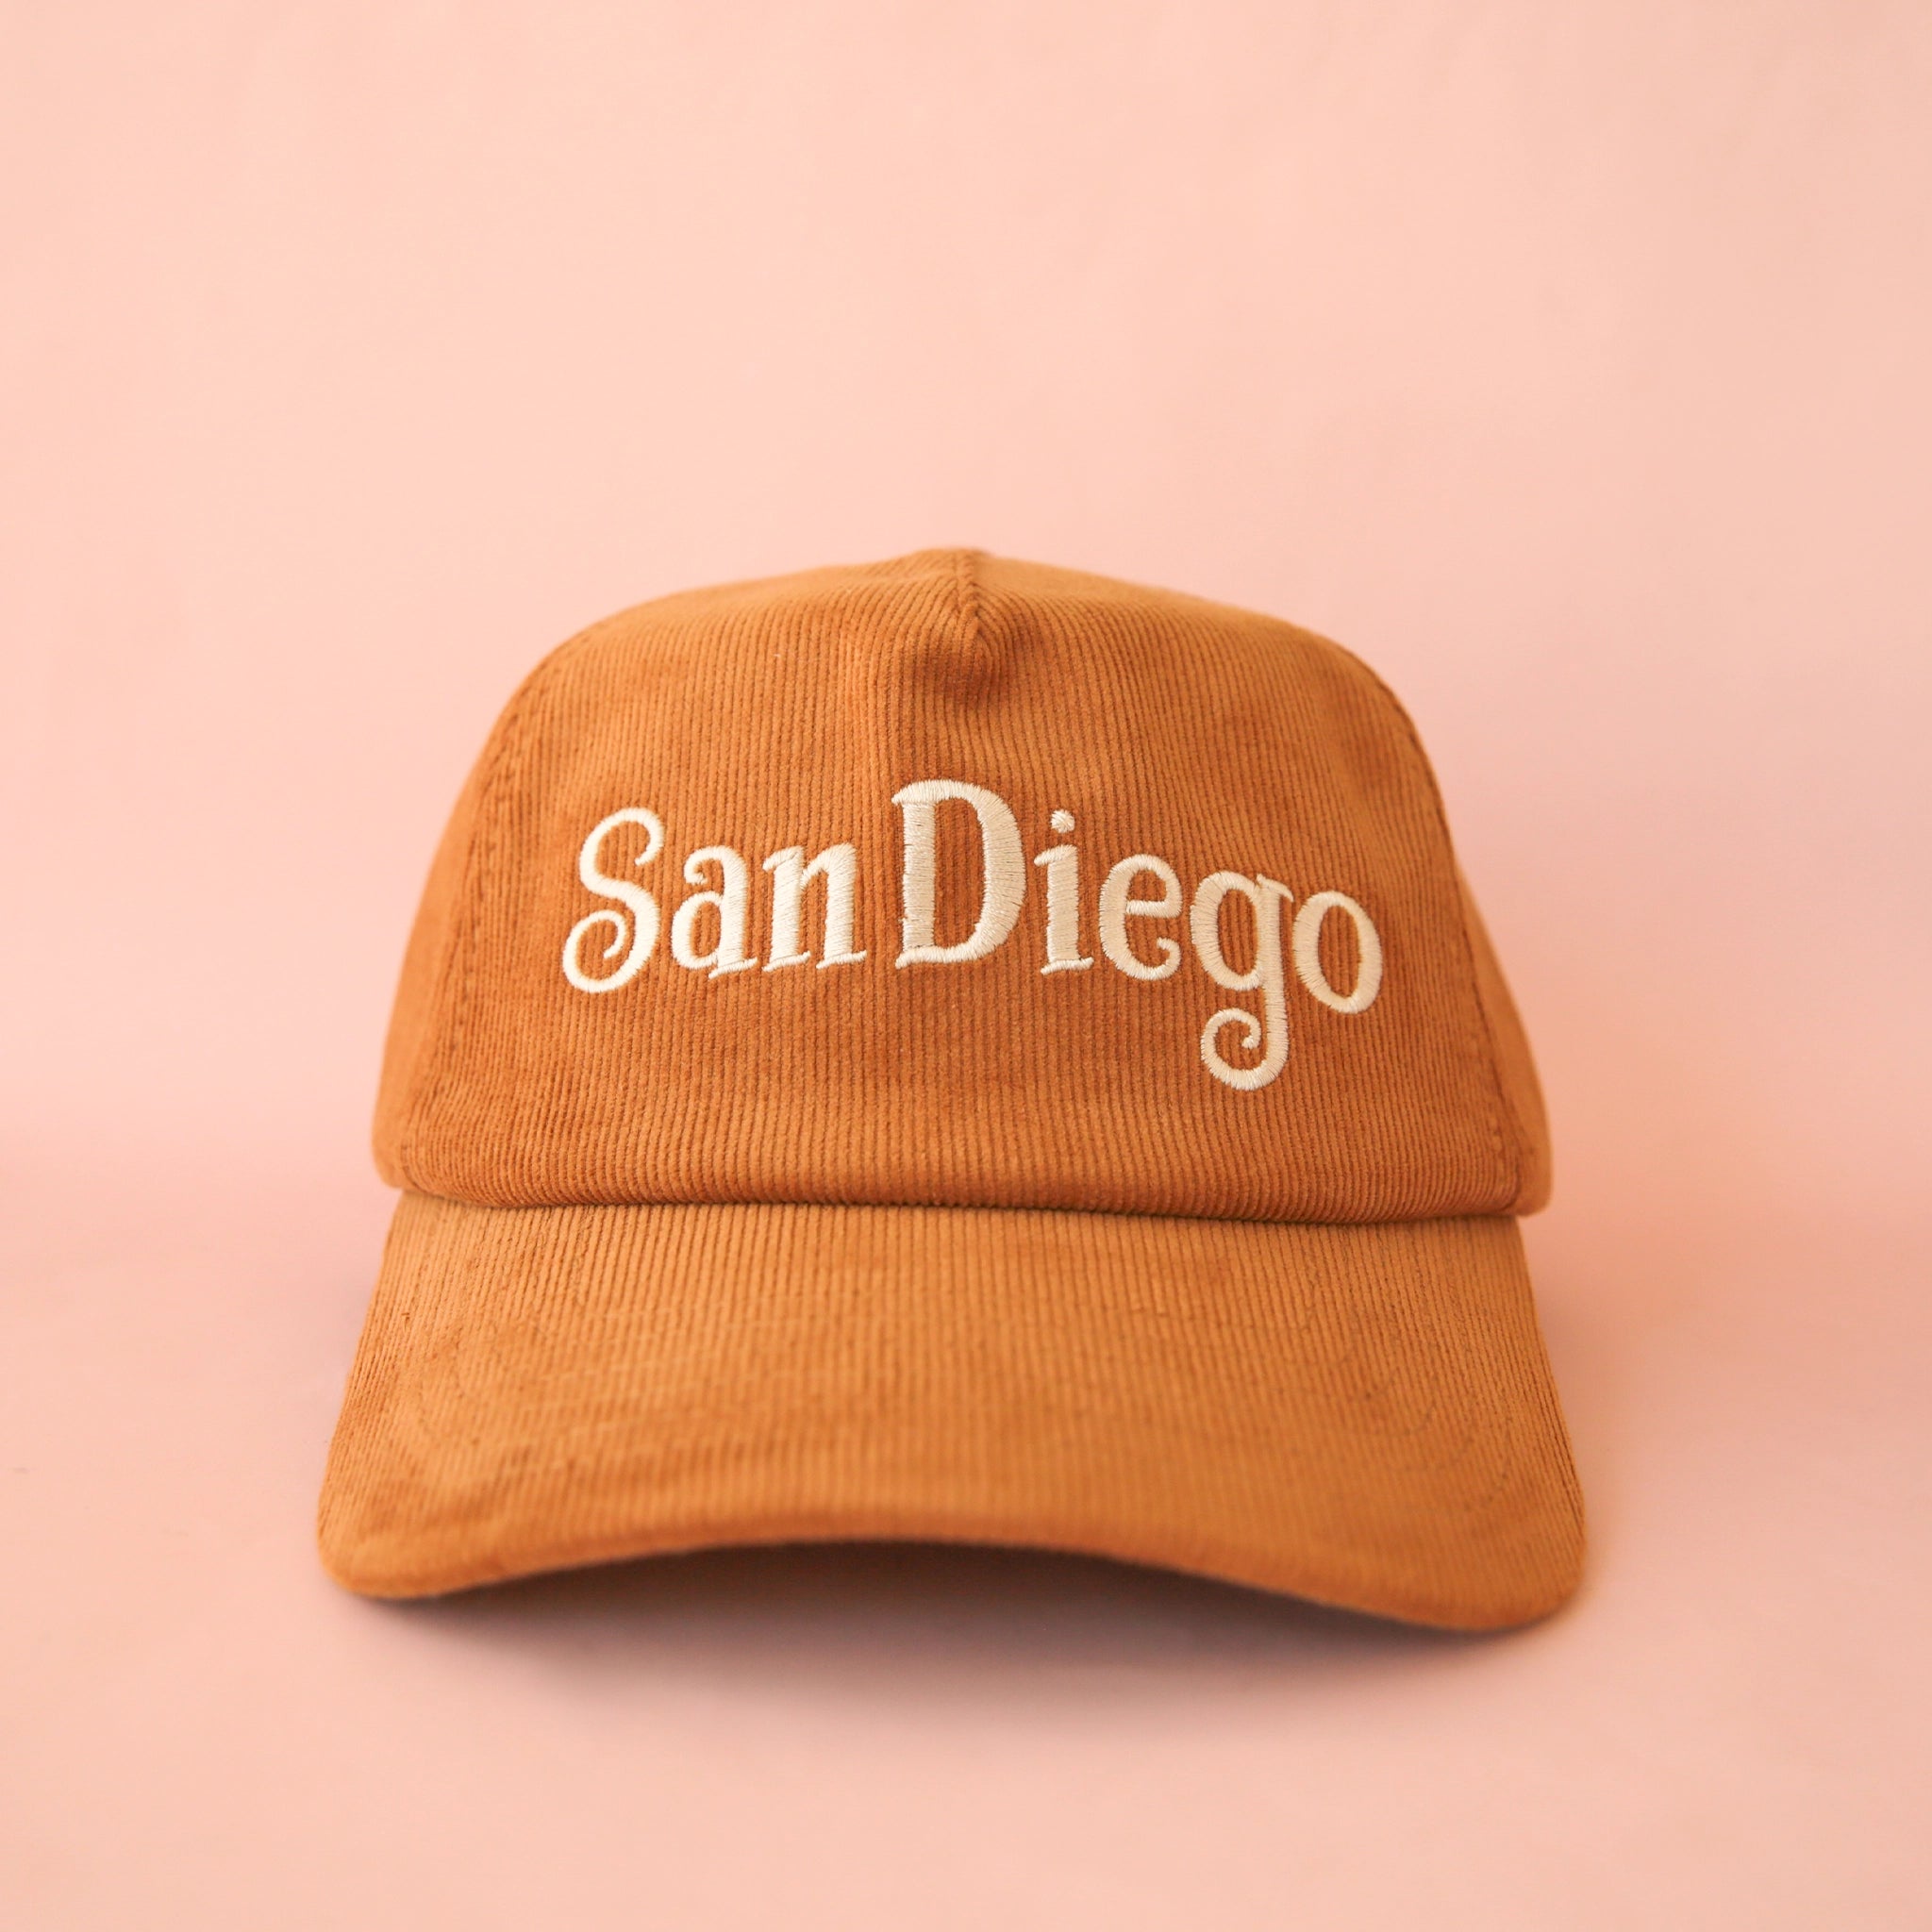 On a pink background is a toffee colored baseball cap that has a corduroy texture and says, &quot;San Diego&quot; in white lettering.